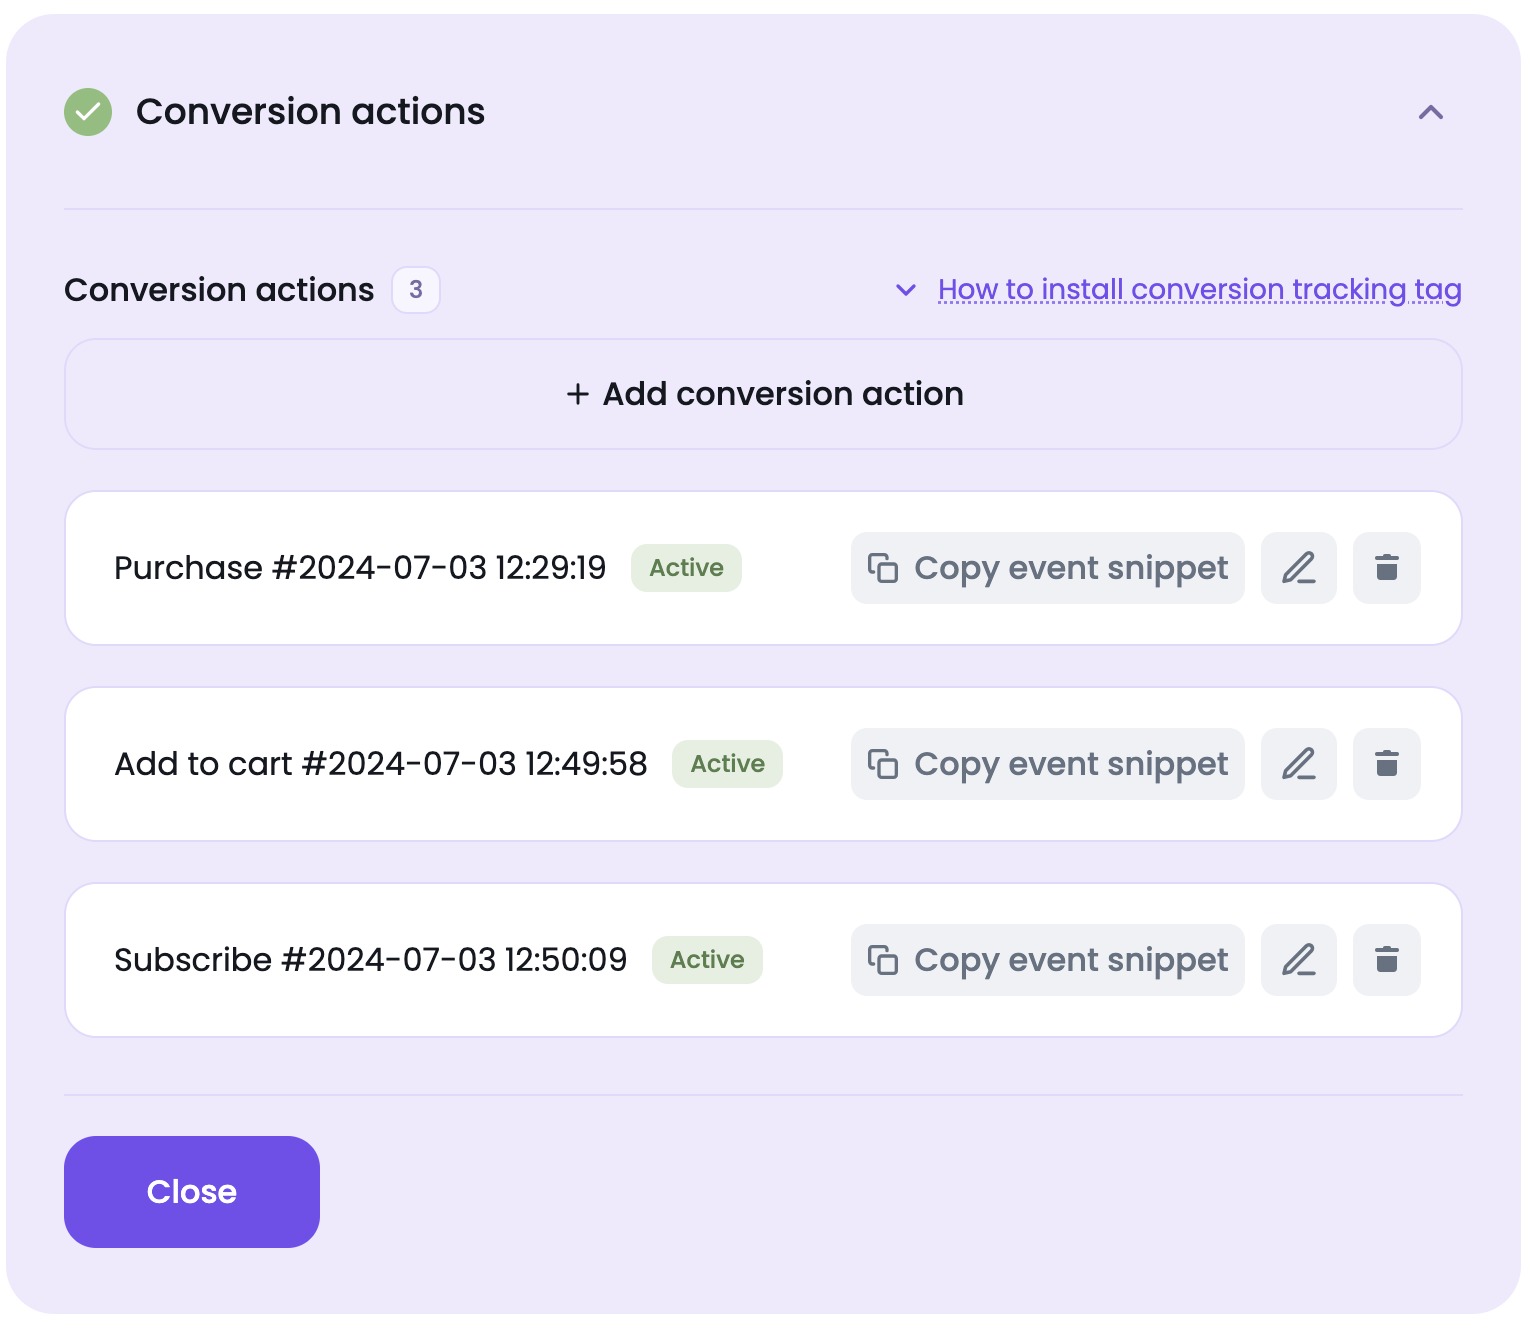 An example of the conversions actions section in a Search Campaign setup process.